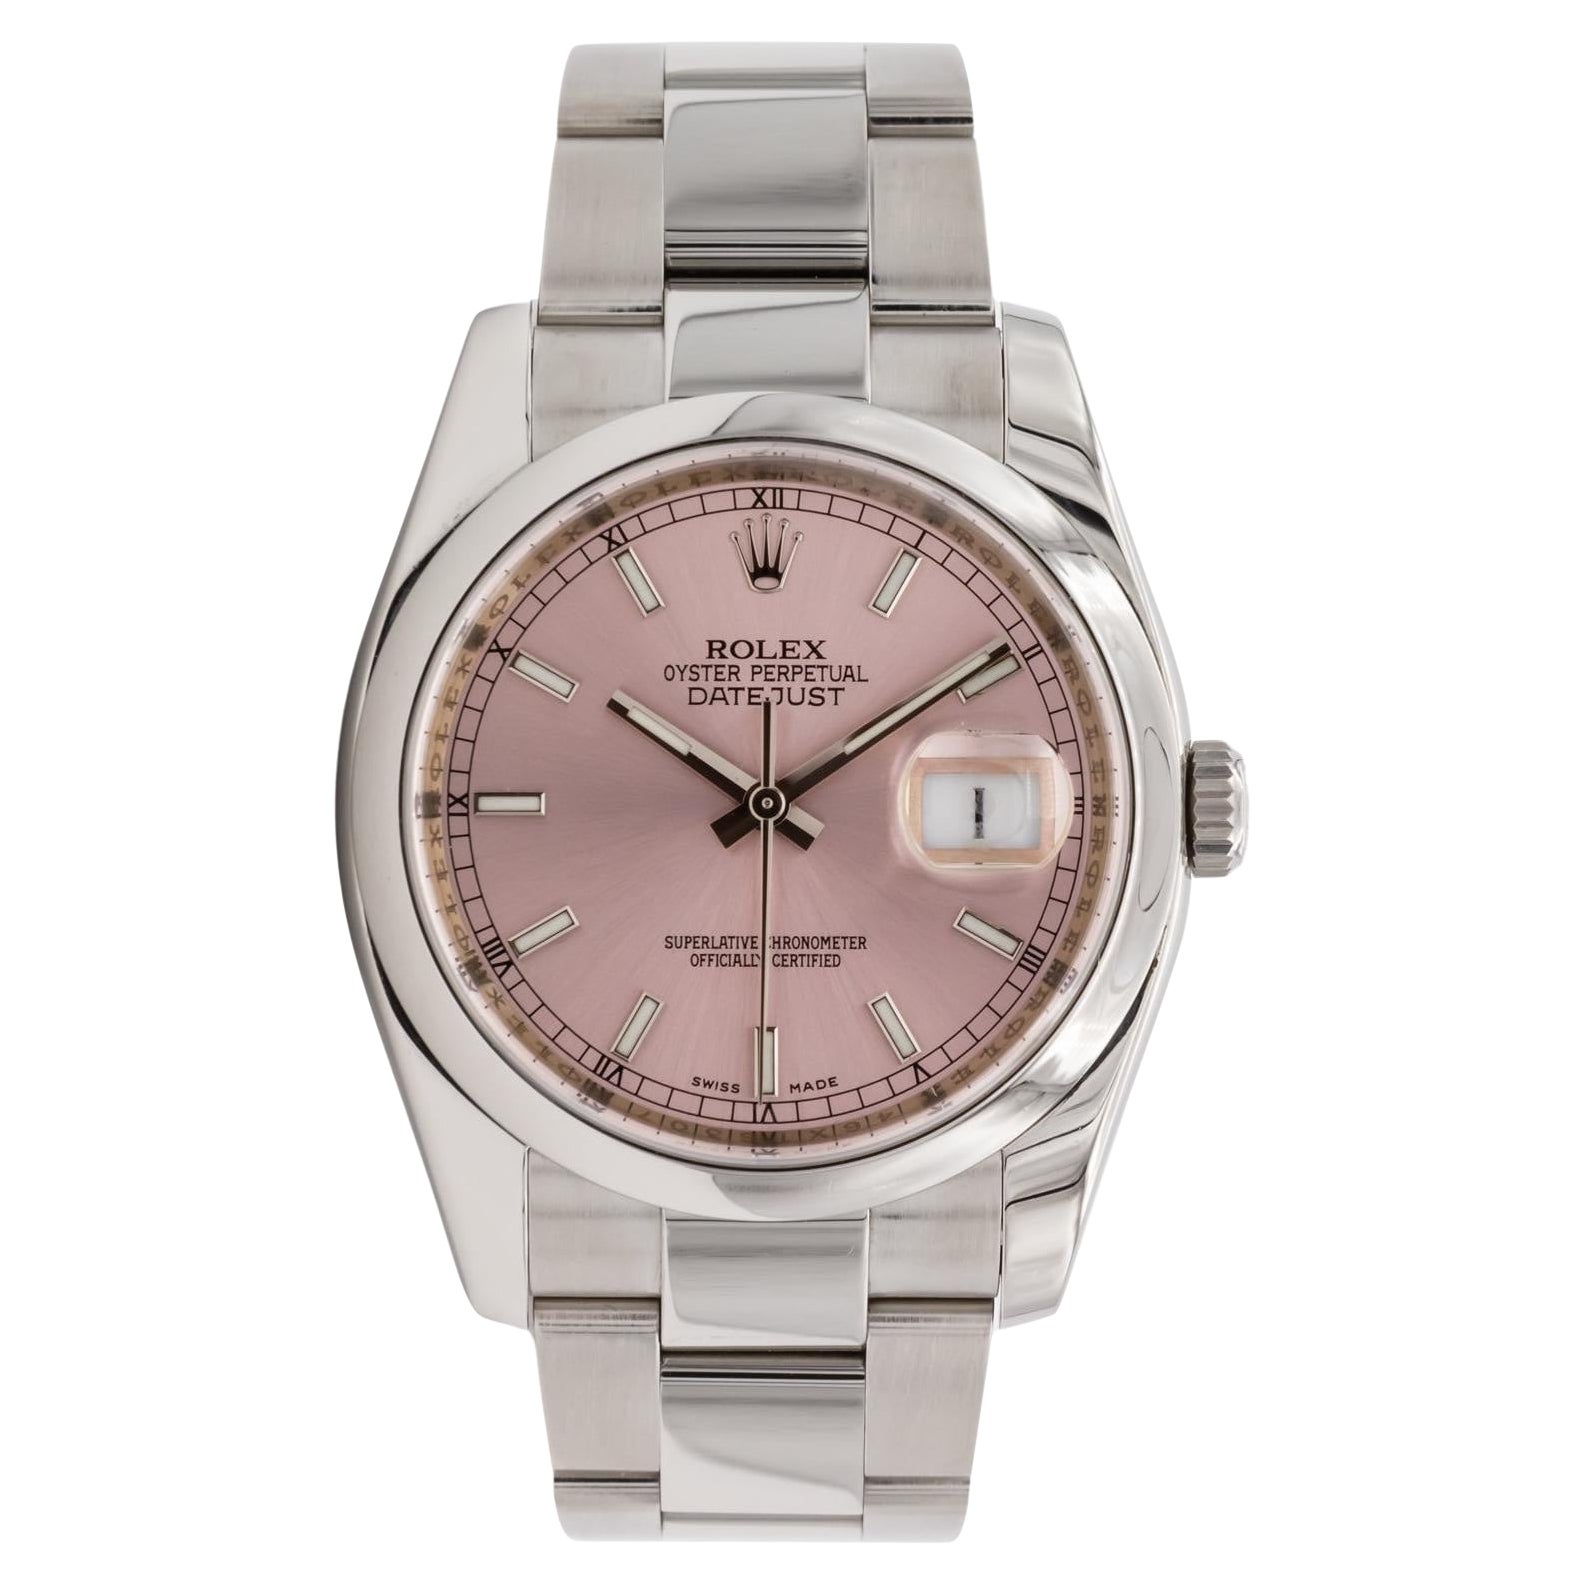 Rolex Stainless Steel Datejust 36mm With Rare Pink Dial 116200